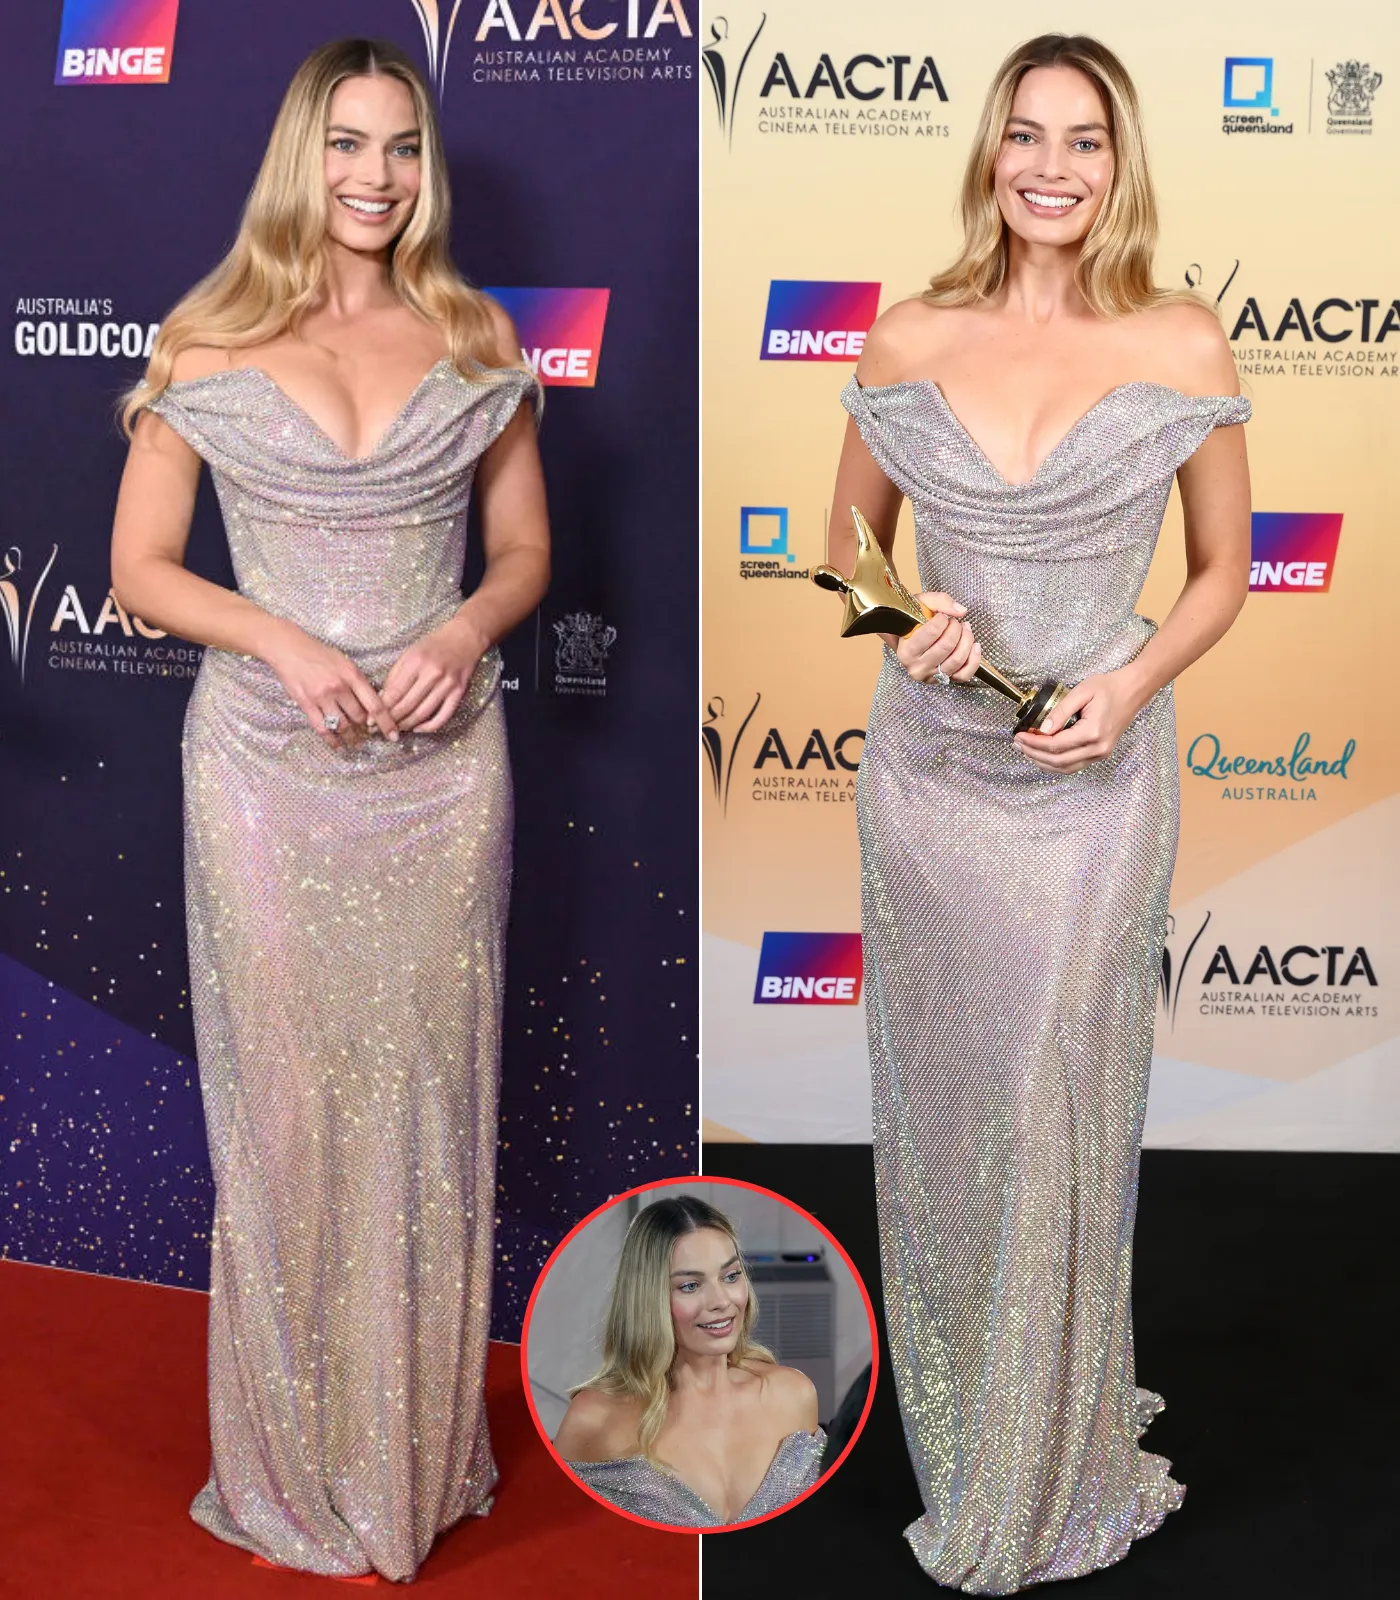 Barbie star Margot Robbie stuns in plunging gown on red carpet at awards bash in Australia